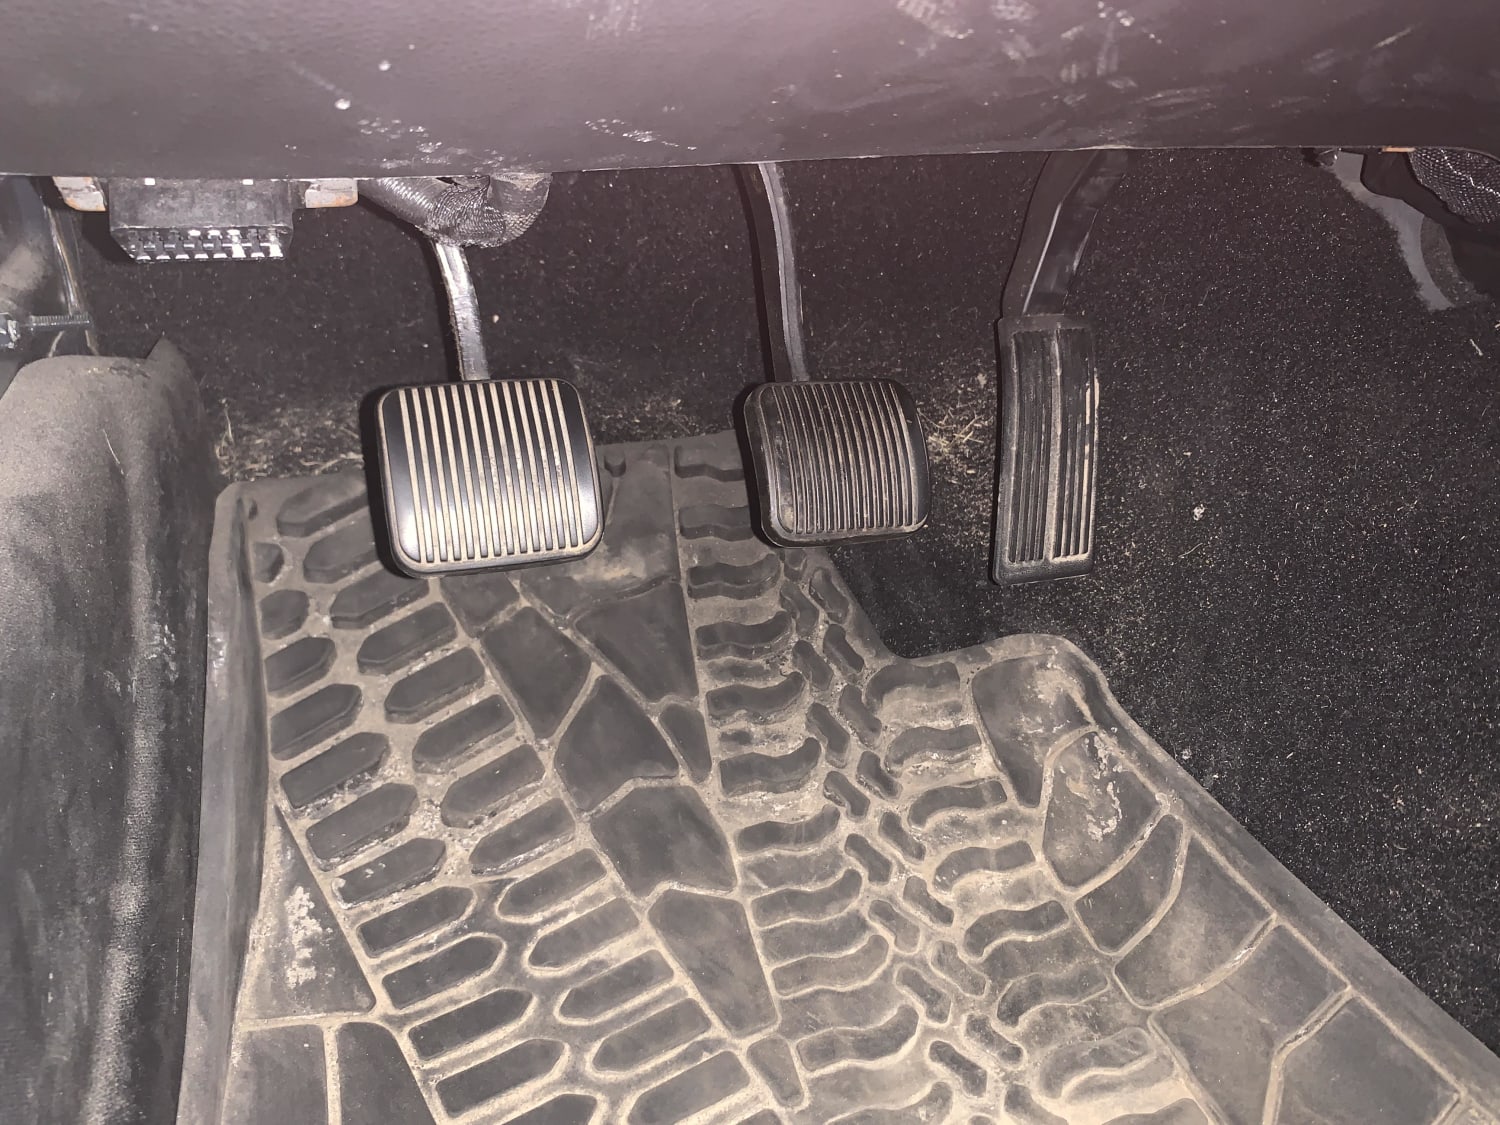 Jeeps floor mats excluding under the accelerator to prevent the pedal from getting stuck on the mat.